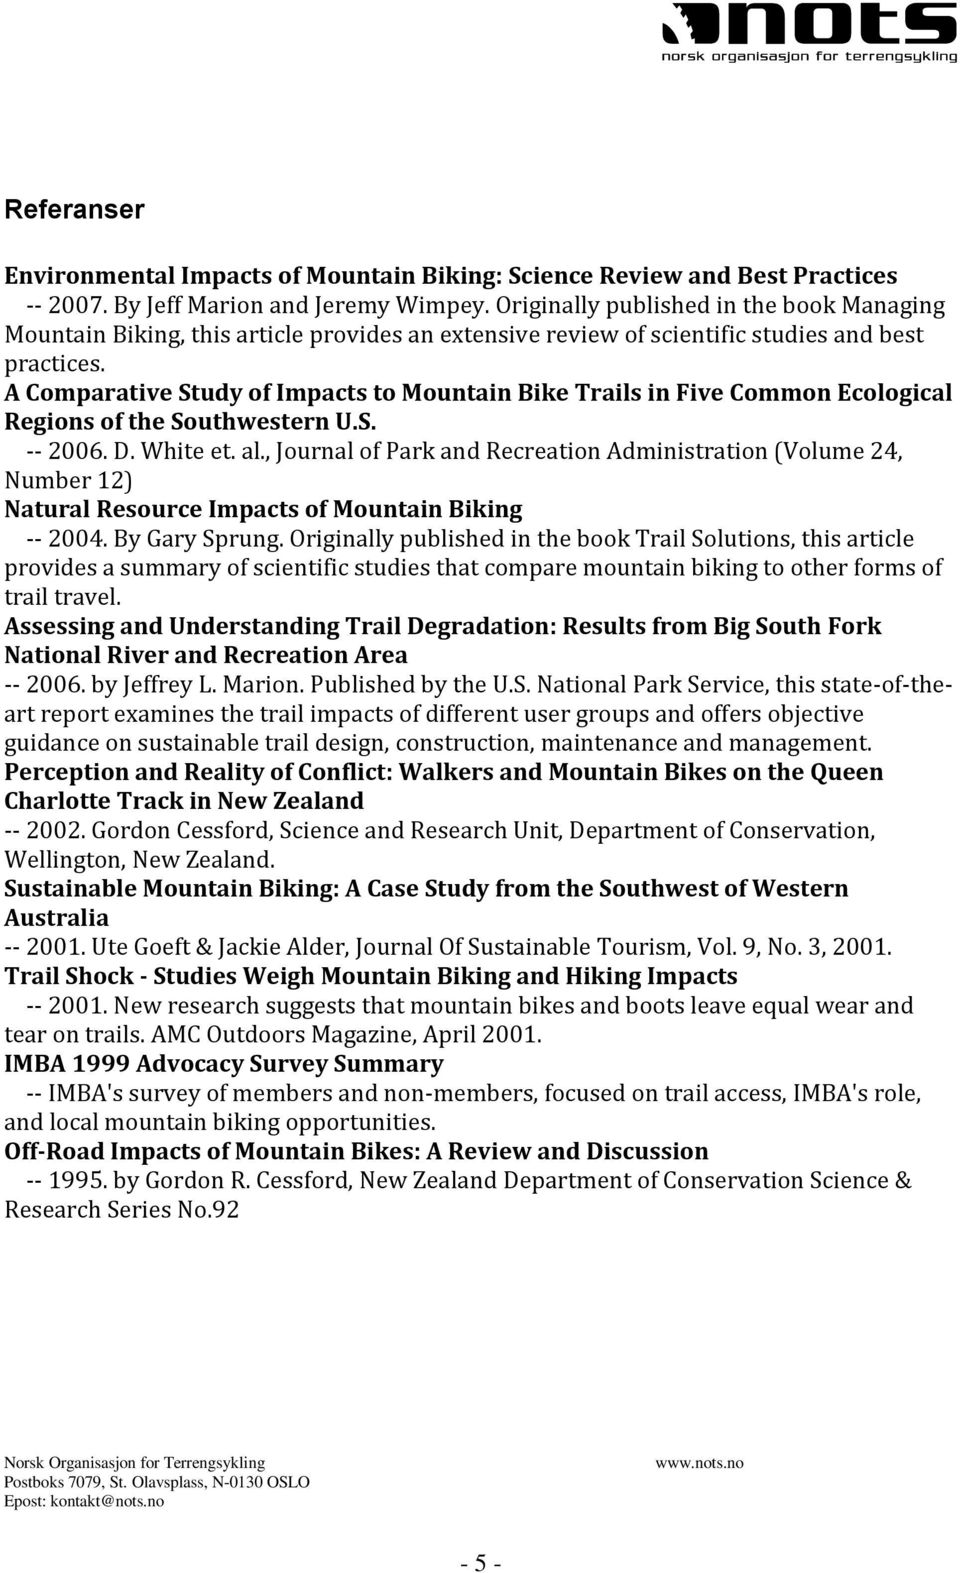 A Comparative Study of Impacts to Mountain Bike Trails in Five Common Ecological Regions of the Southwestern U.S. -- 2006. D. White et. al.